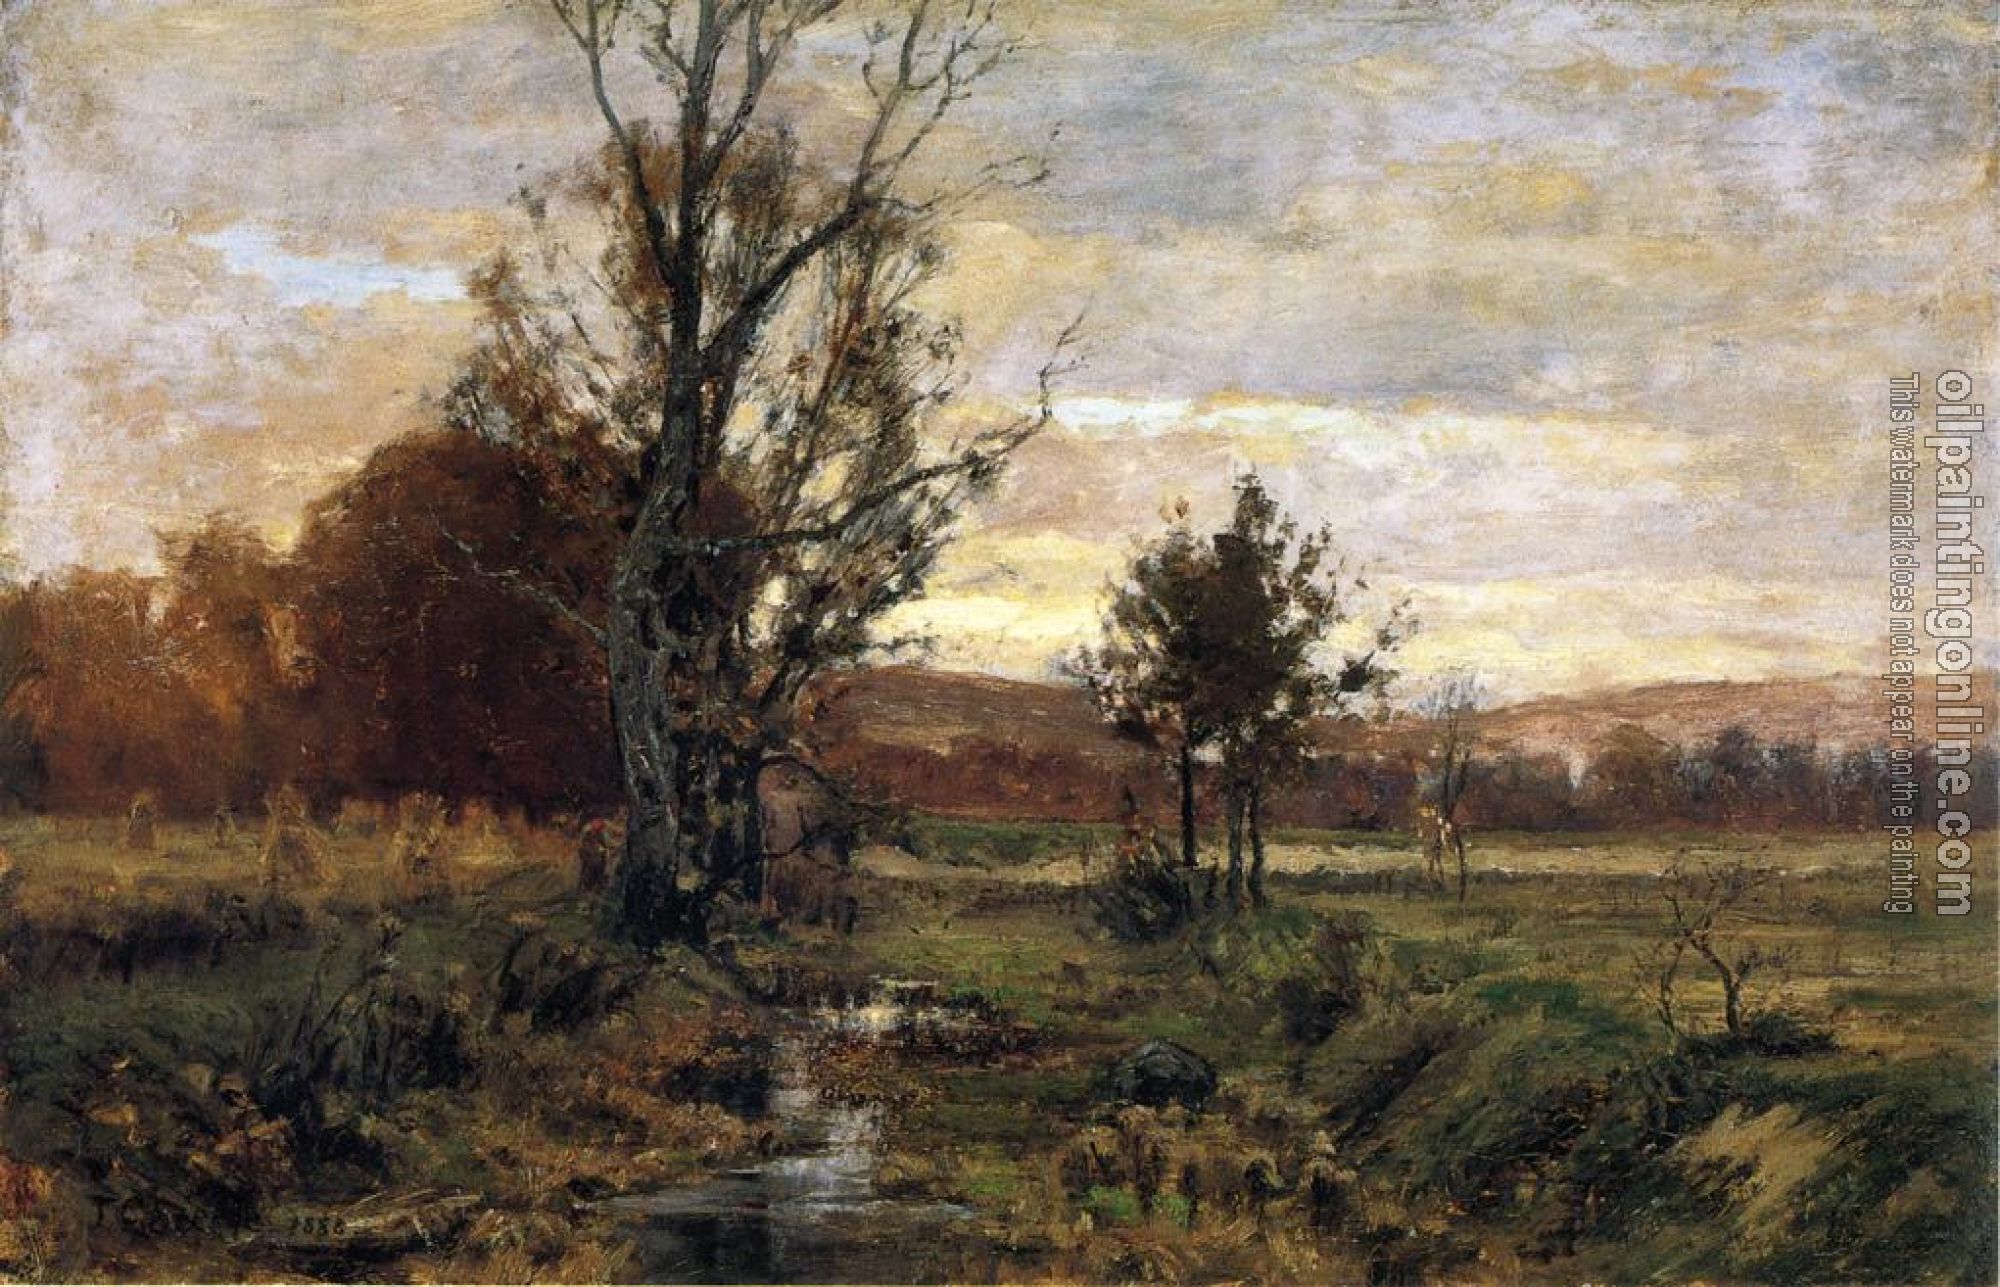 Steele, Theodore Clement - A Bleak day